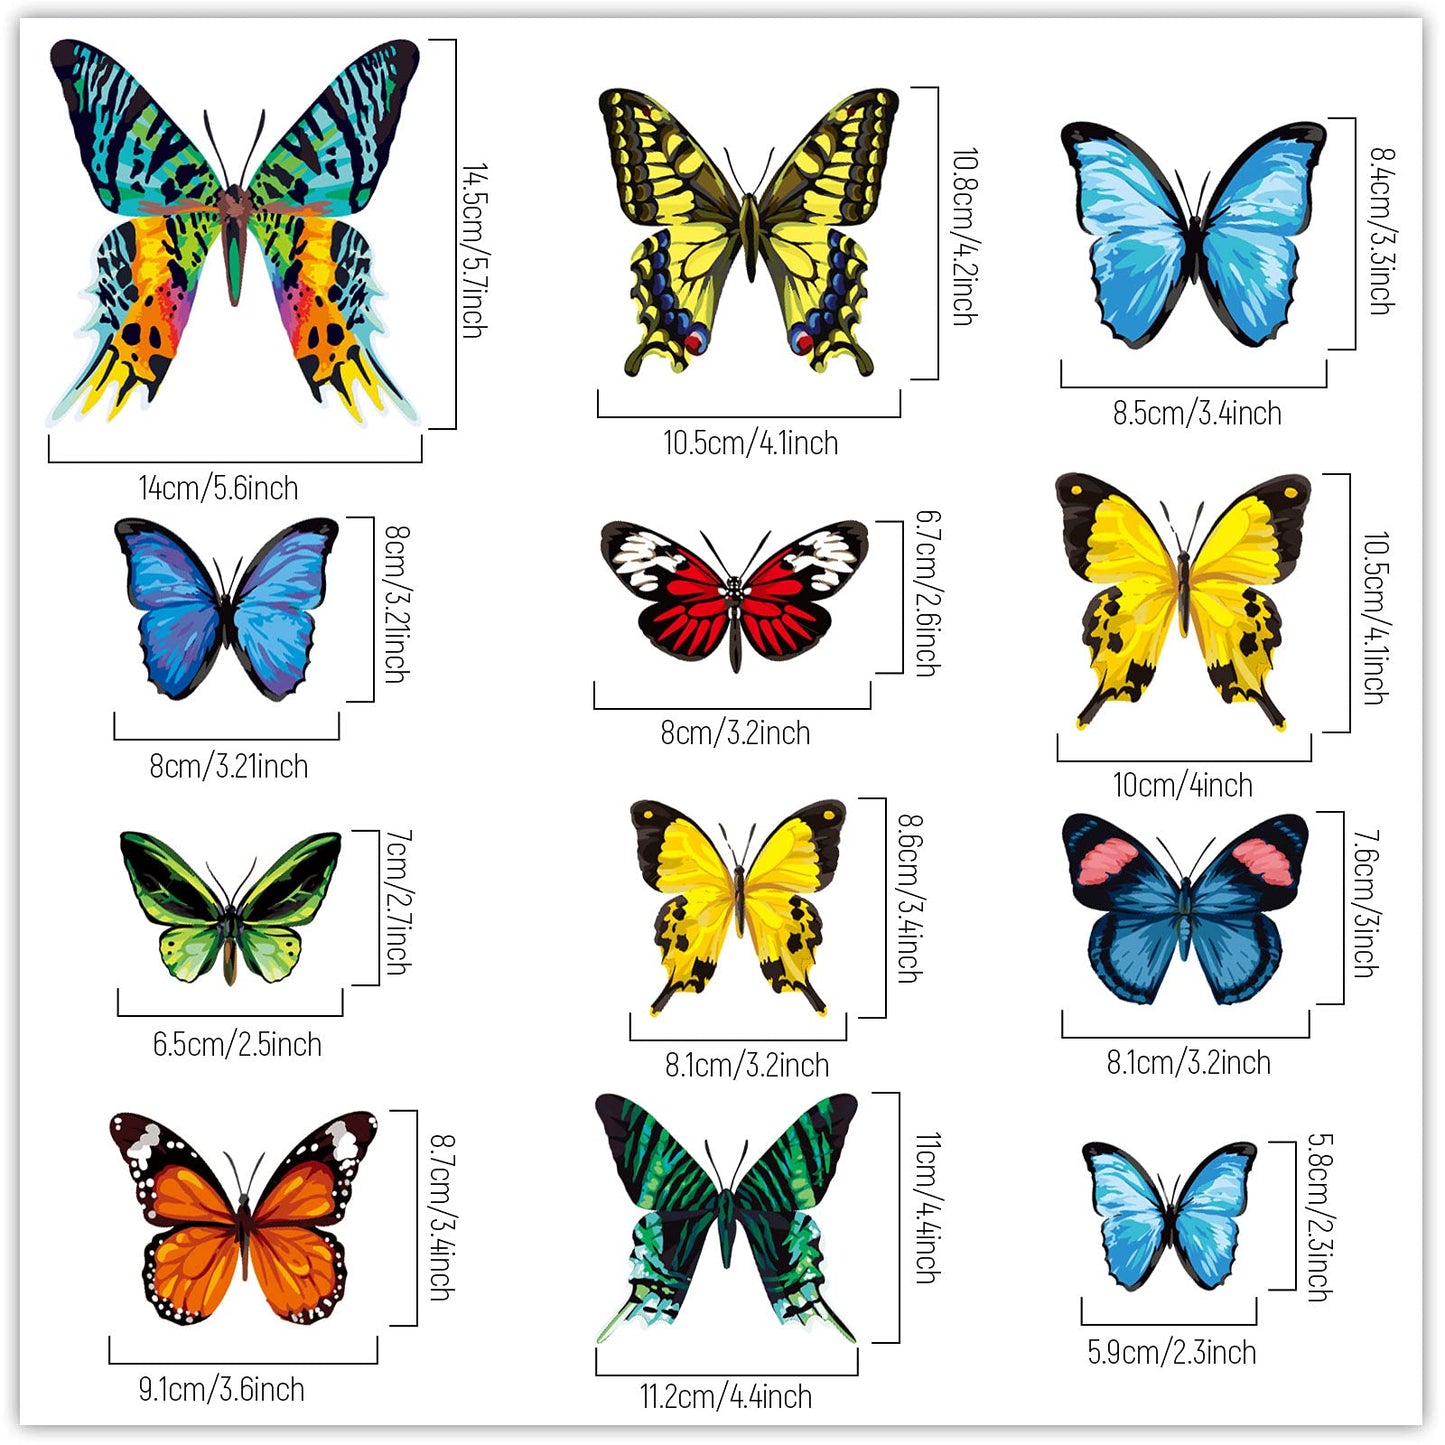 Whaline 24Pcs Colorful Butterfly Window Clings Double-Sided Anti-Collision Window Decals to Prevent Bird Strikes on Window Glass Non-Adhesive Static Butterfly Cling Stickers for Home Window Glass